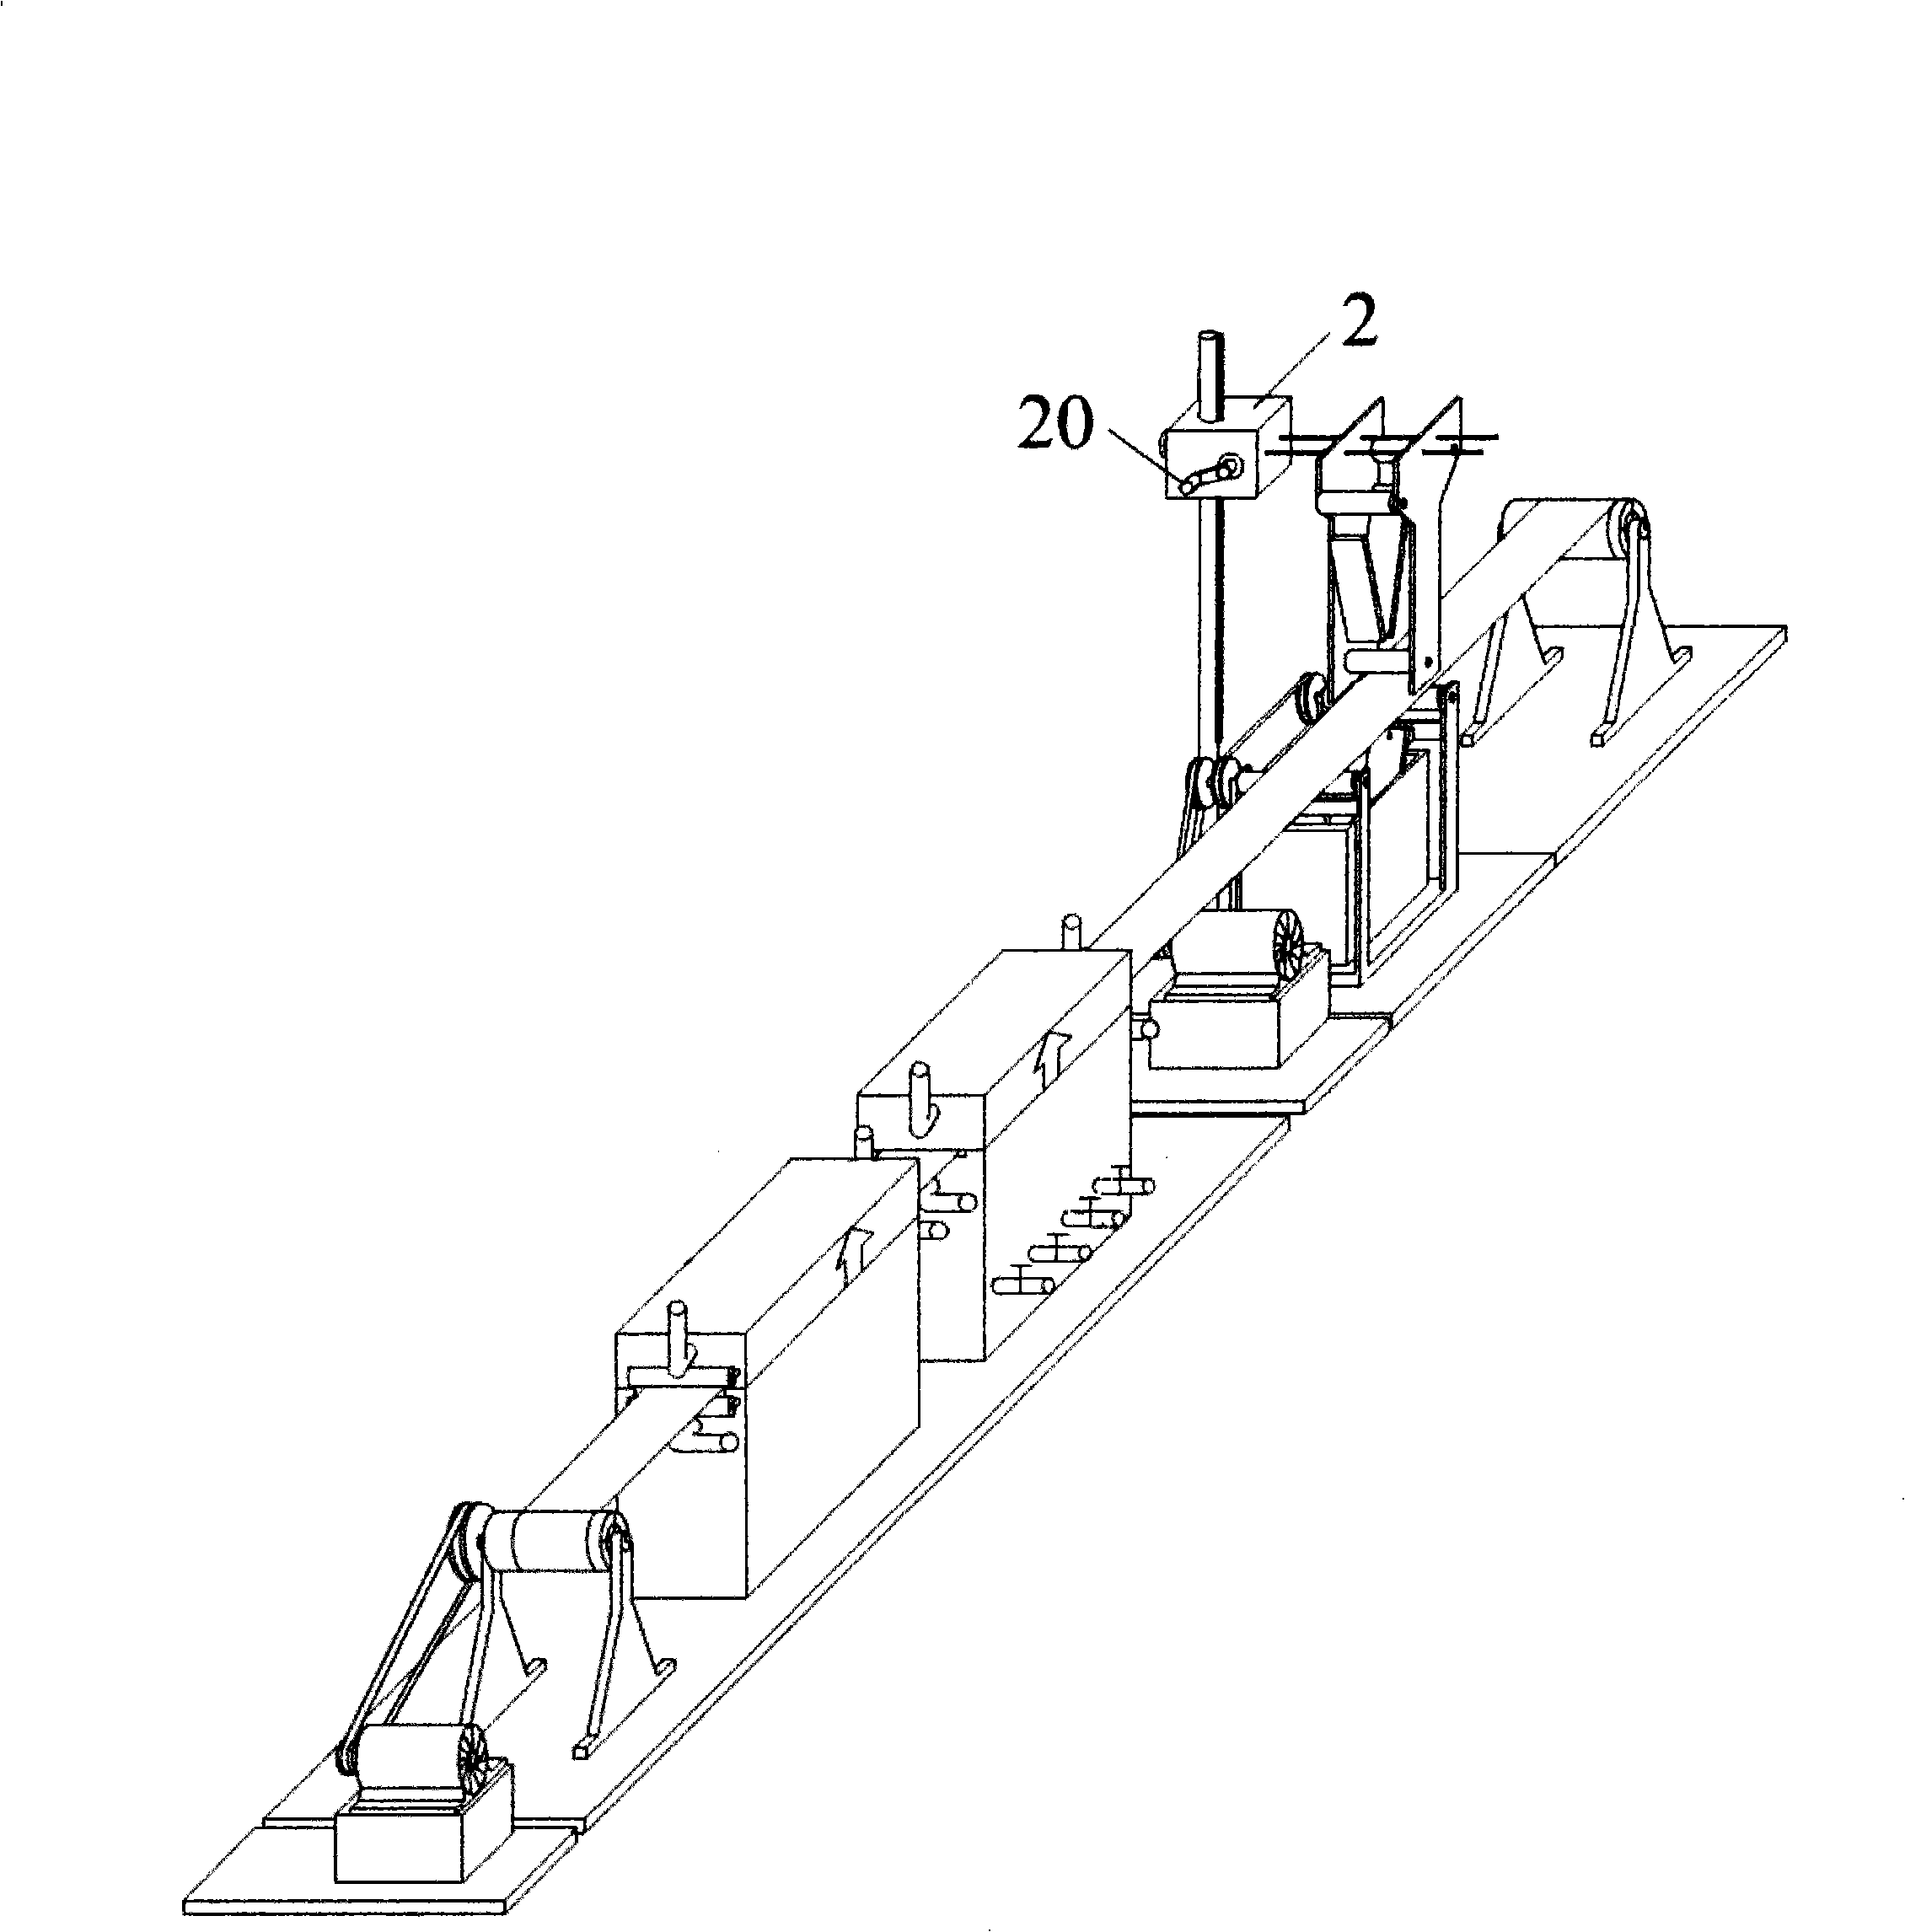 Metal foil band electroplating system and application thereof